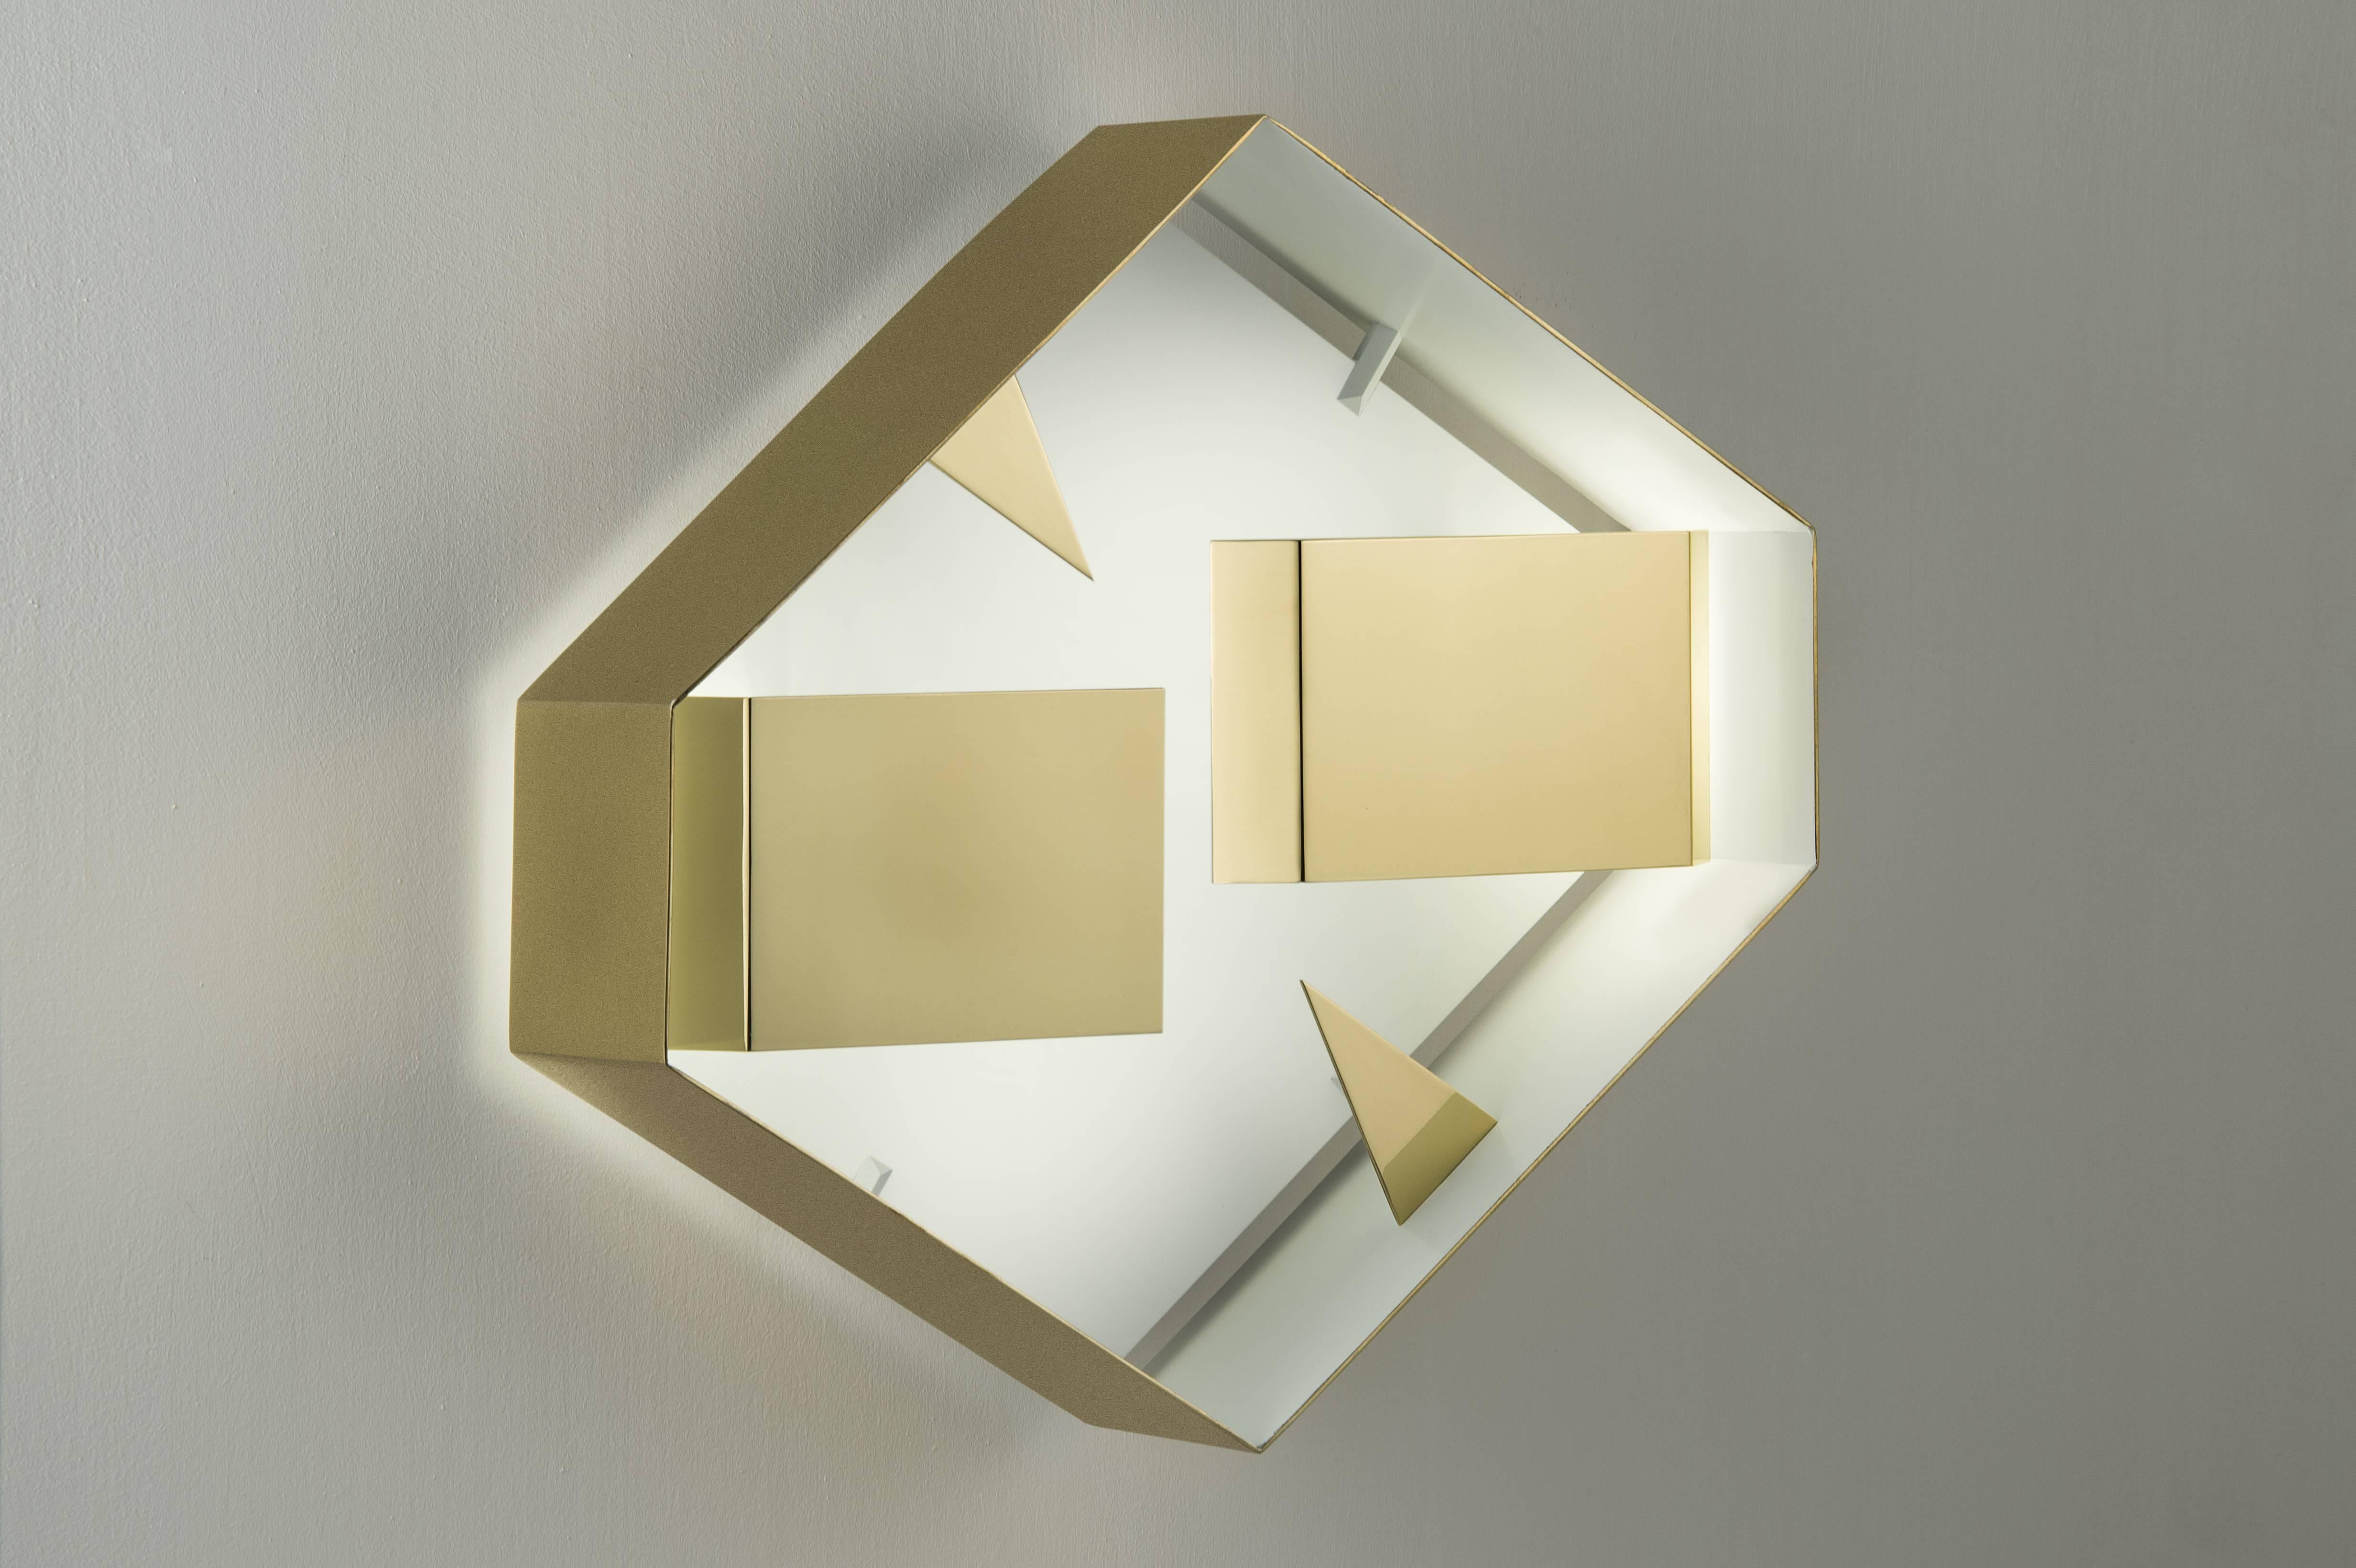 Gio Ponti used to say that his Quadro di Luce were no decorations but allegories.

Wall lamp with direct, indirect and partially diffuse light. 

Brass in the outside, matte white finish inside. 

Re-edition by Pollice Illuminazione.

All pieces are